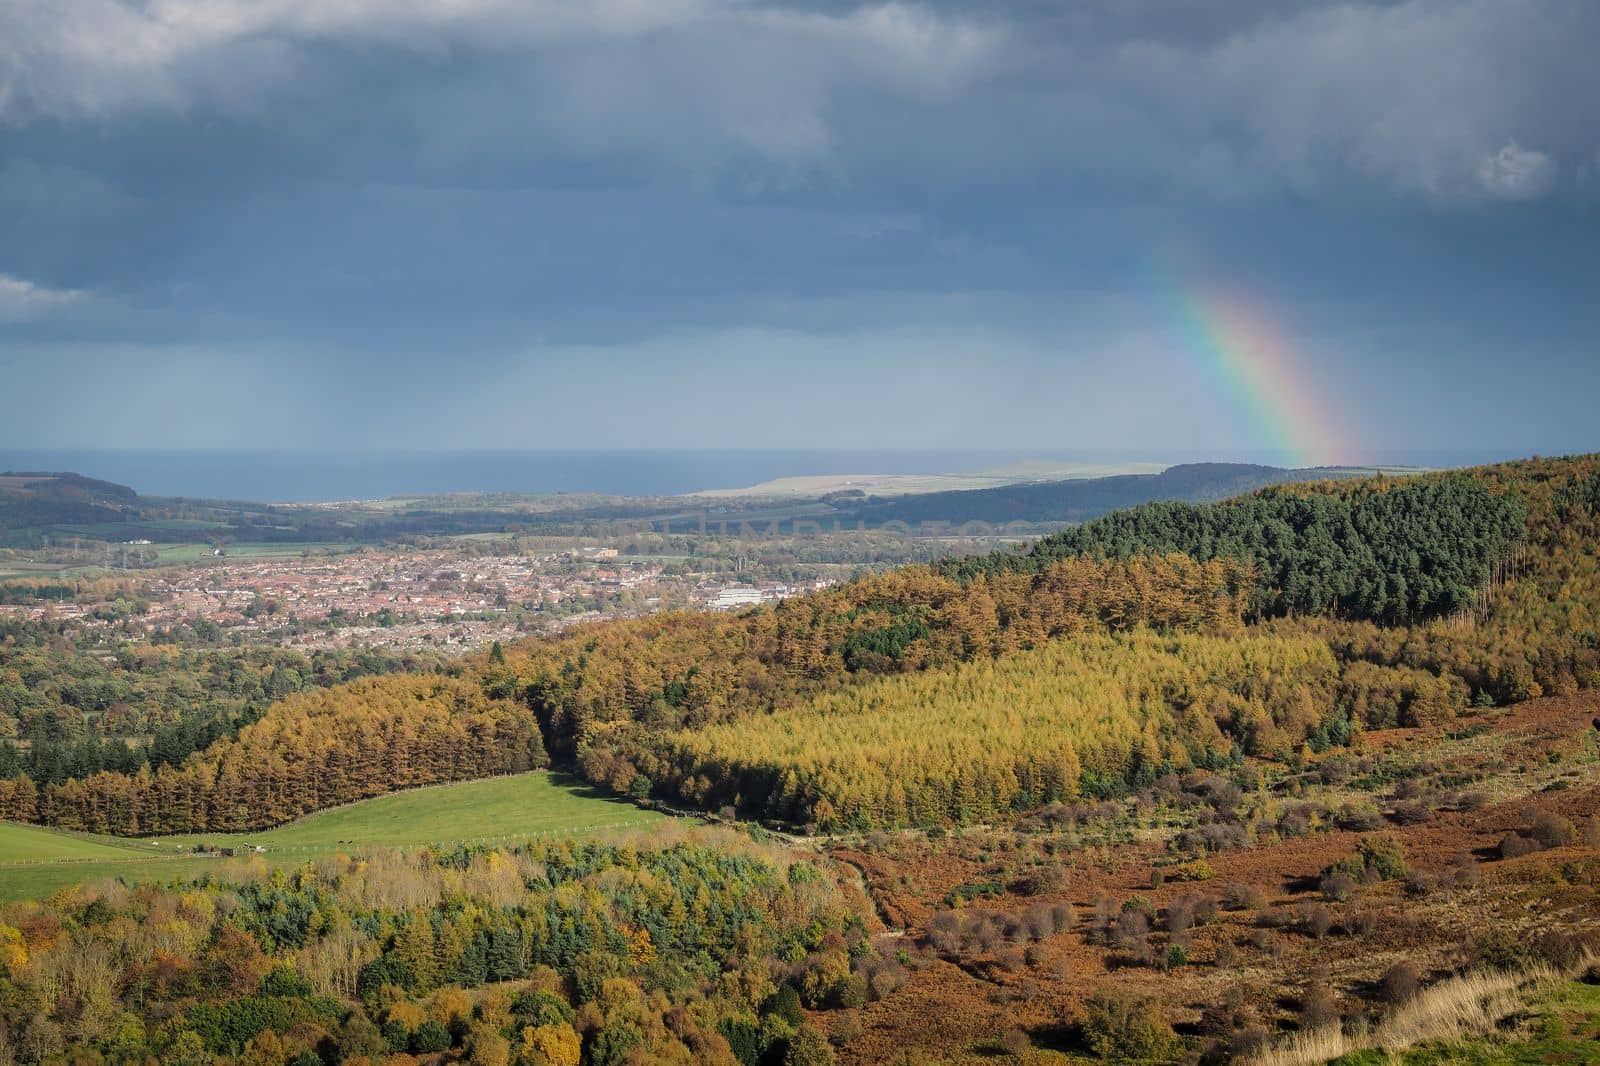 View from Roseberry Topping with rainbow over Guisborough, North York Moors by PhilHarland